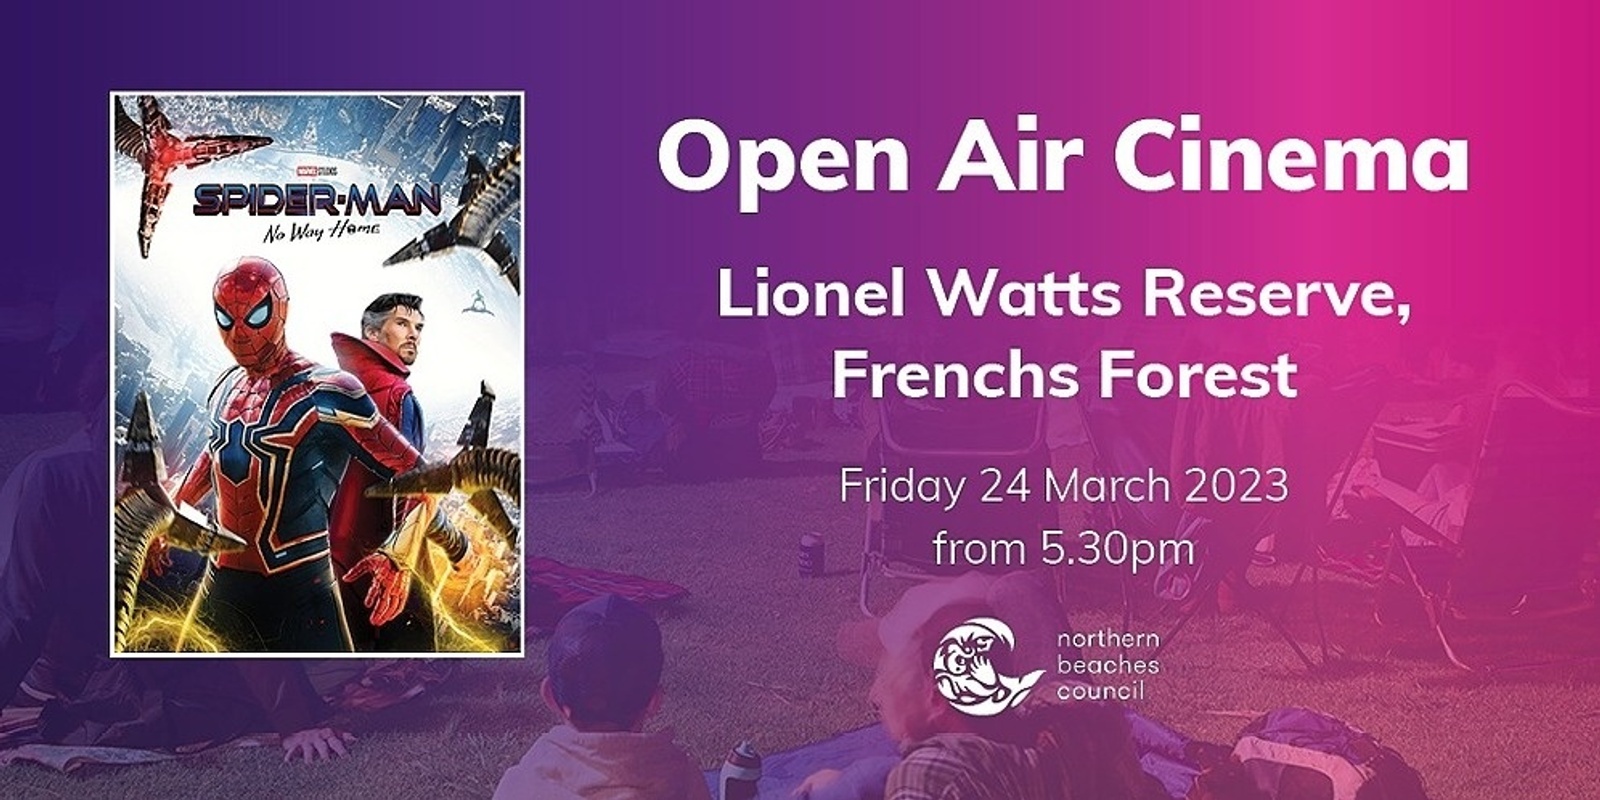 Banner image for Open Air Cinema, Frenchs Forest - Friday 24 March 2023 - Spider-Man No Way Home